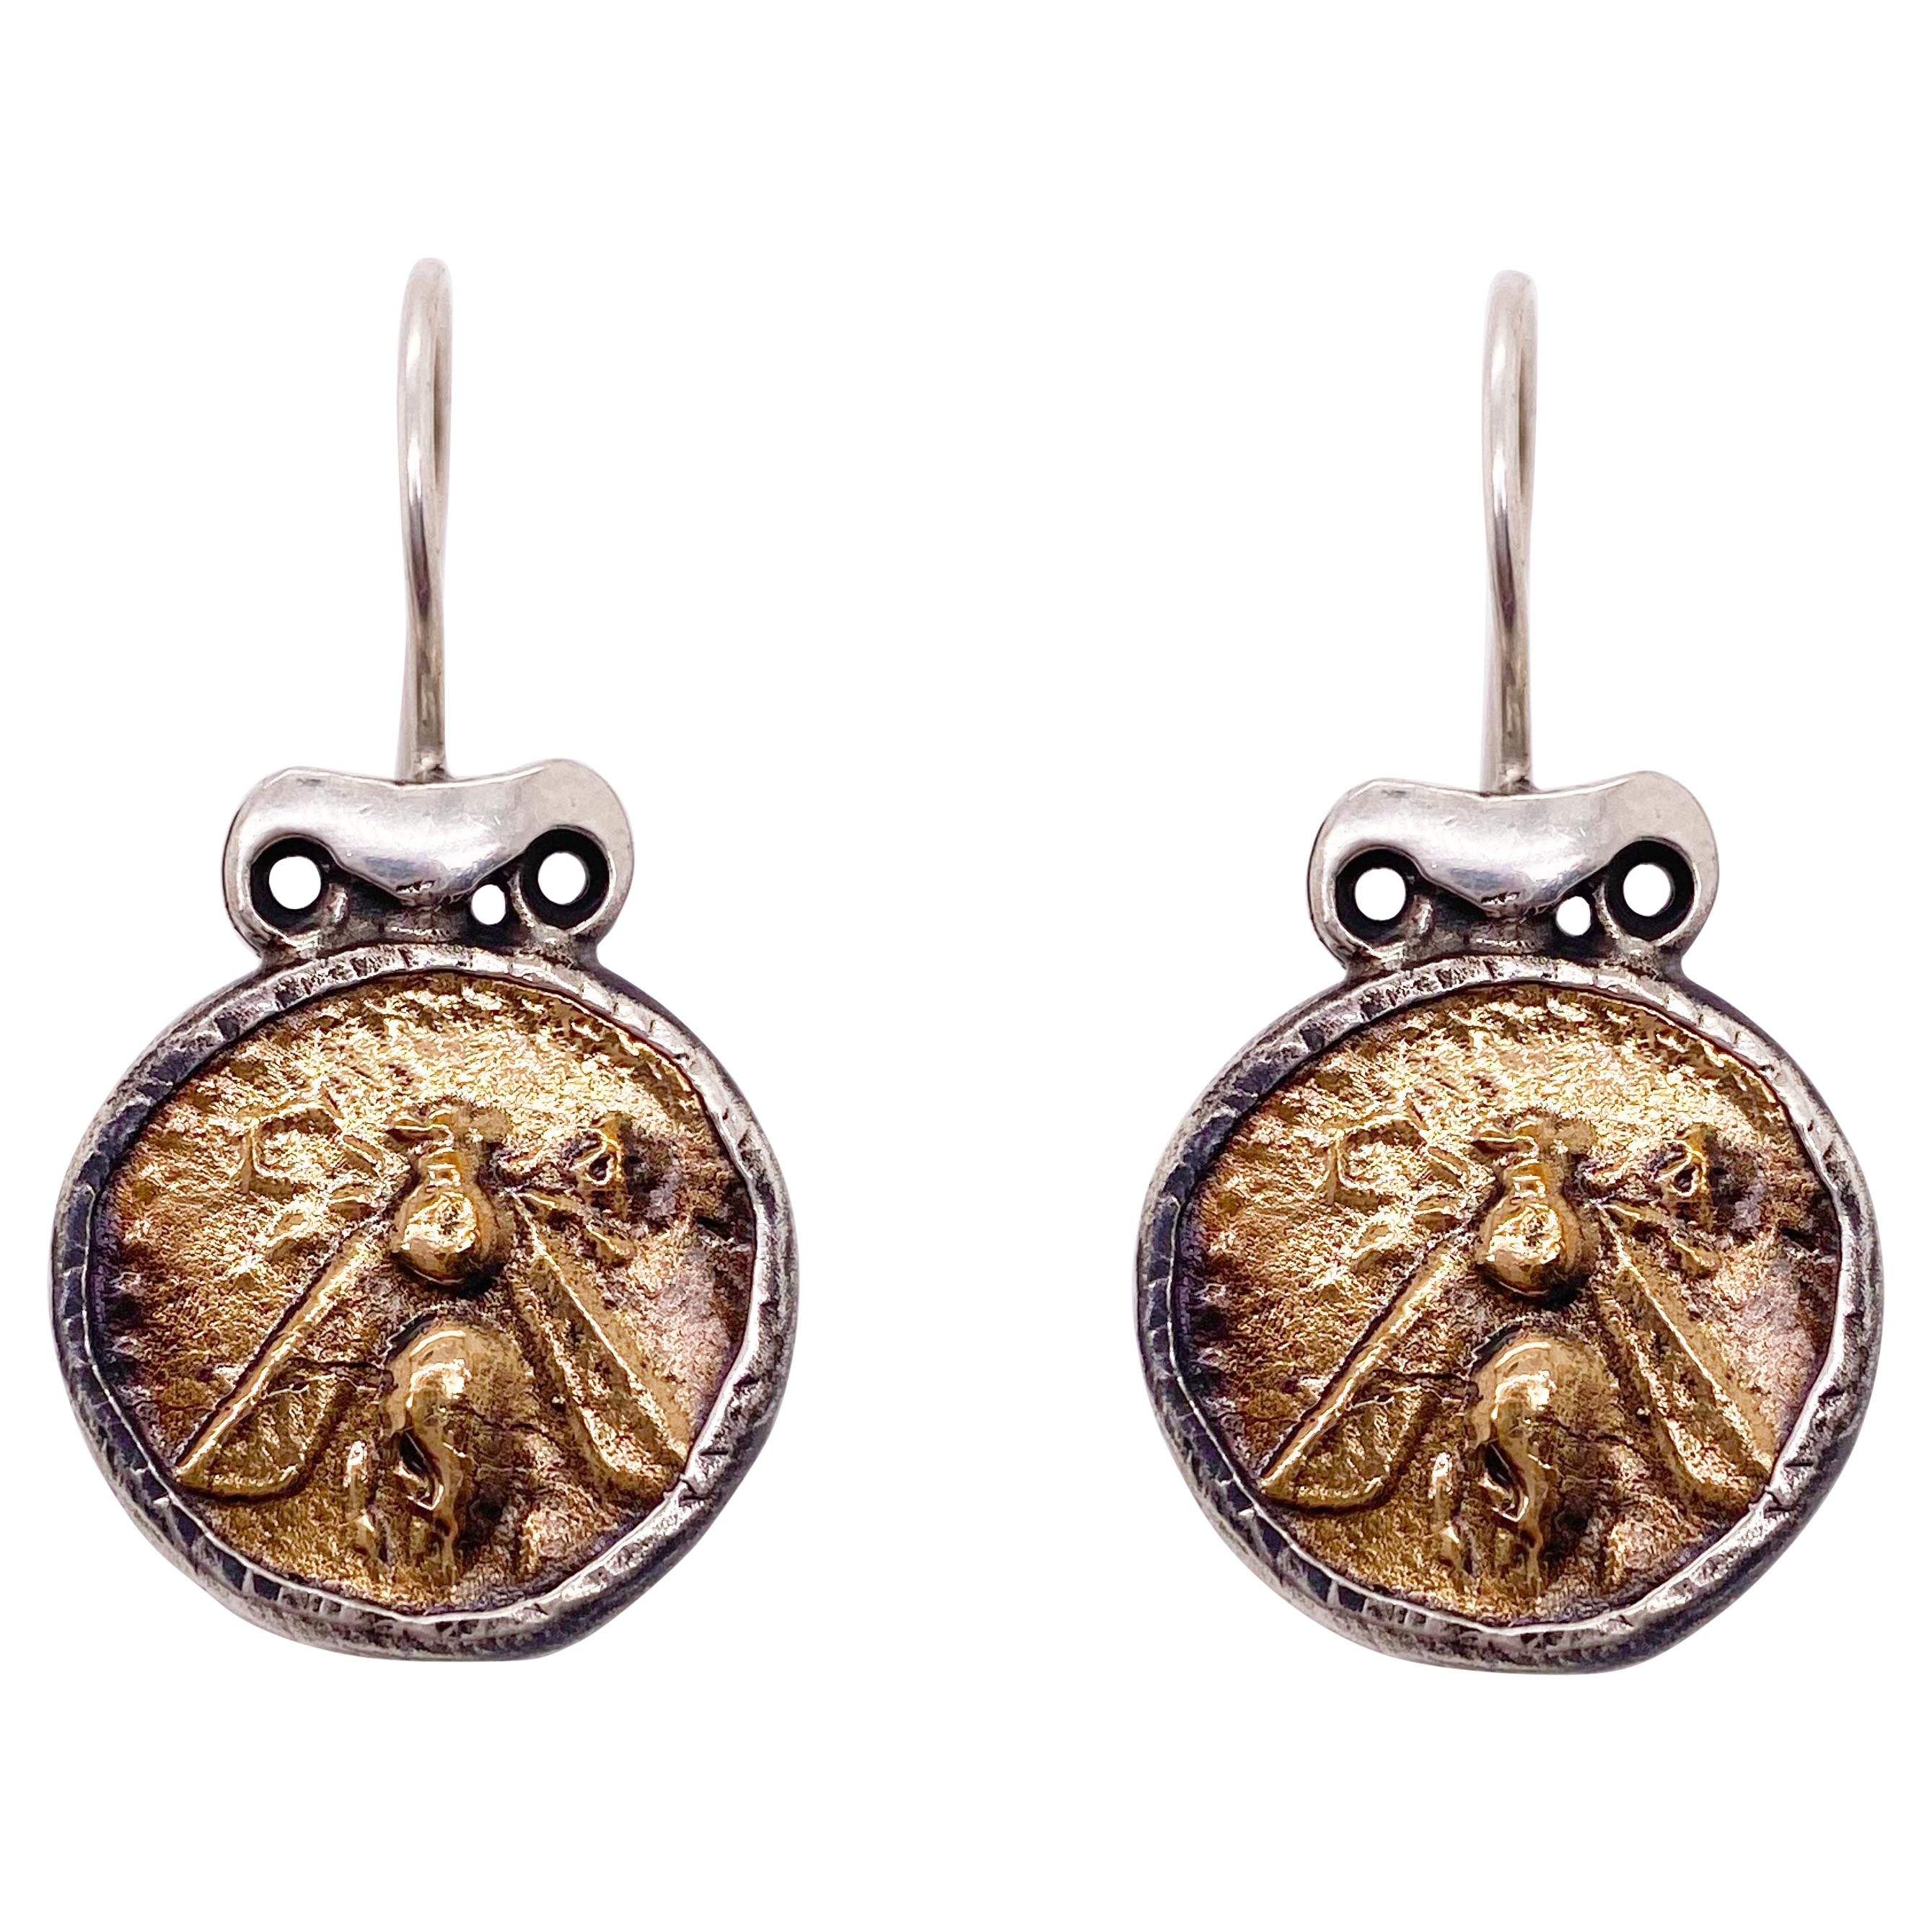 Bumble Bee Earrings w Mixed Metal Dangle Earring with Engraving of Bee